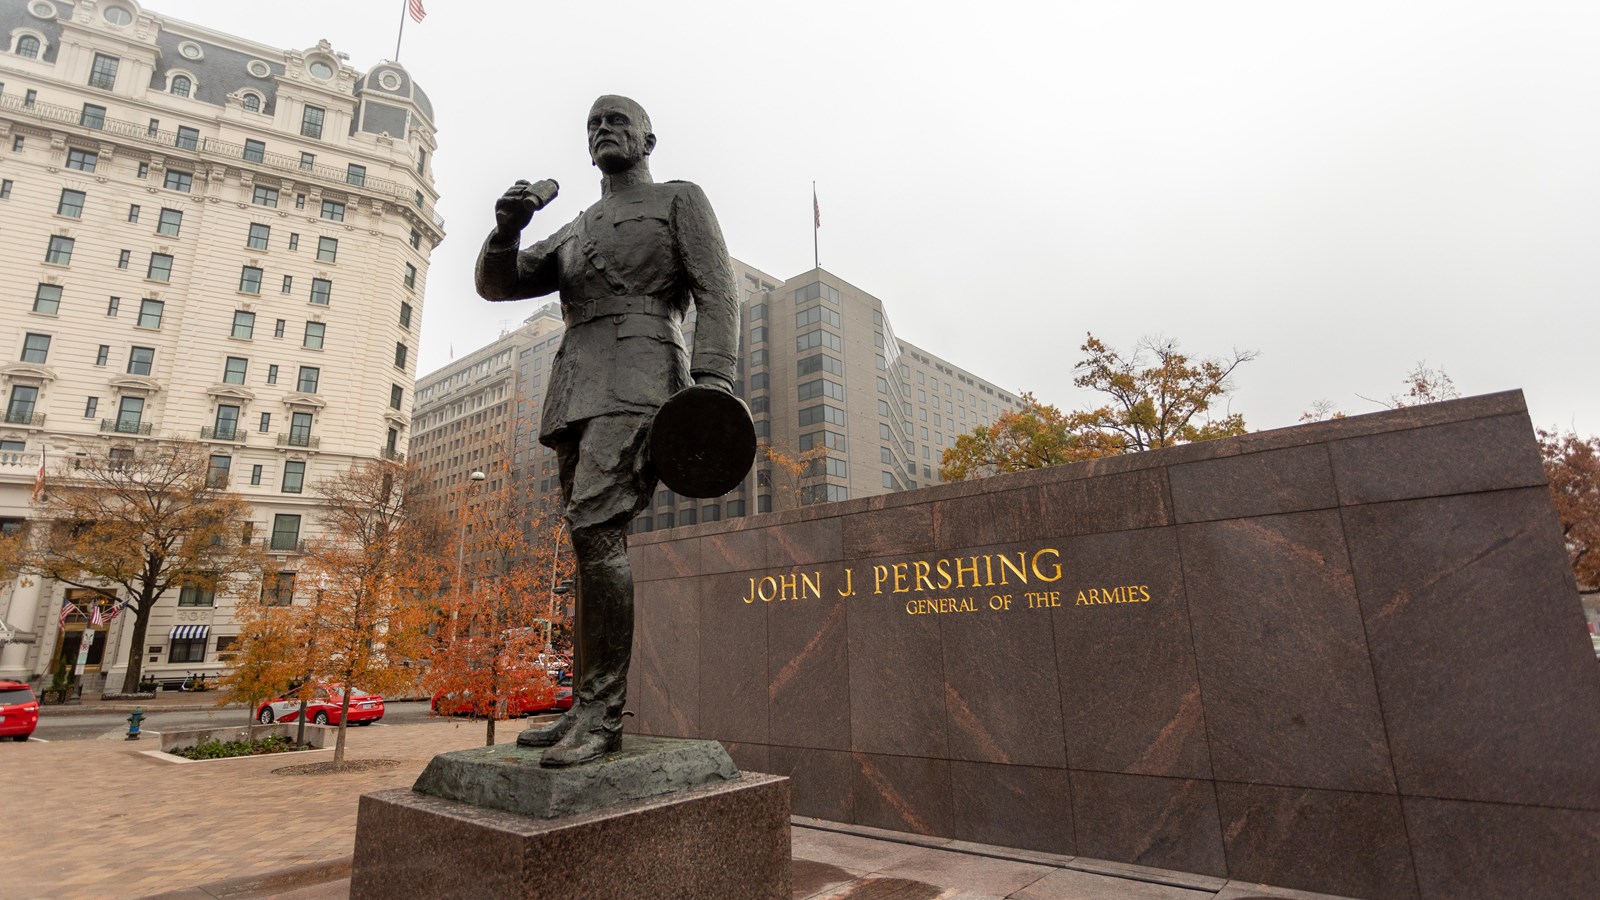 Bronze statue of General Pershing holding binoculars and his hat.